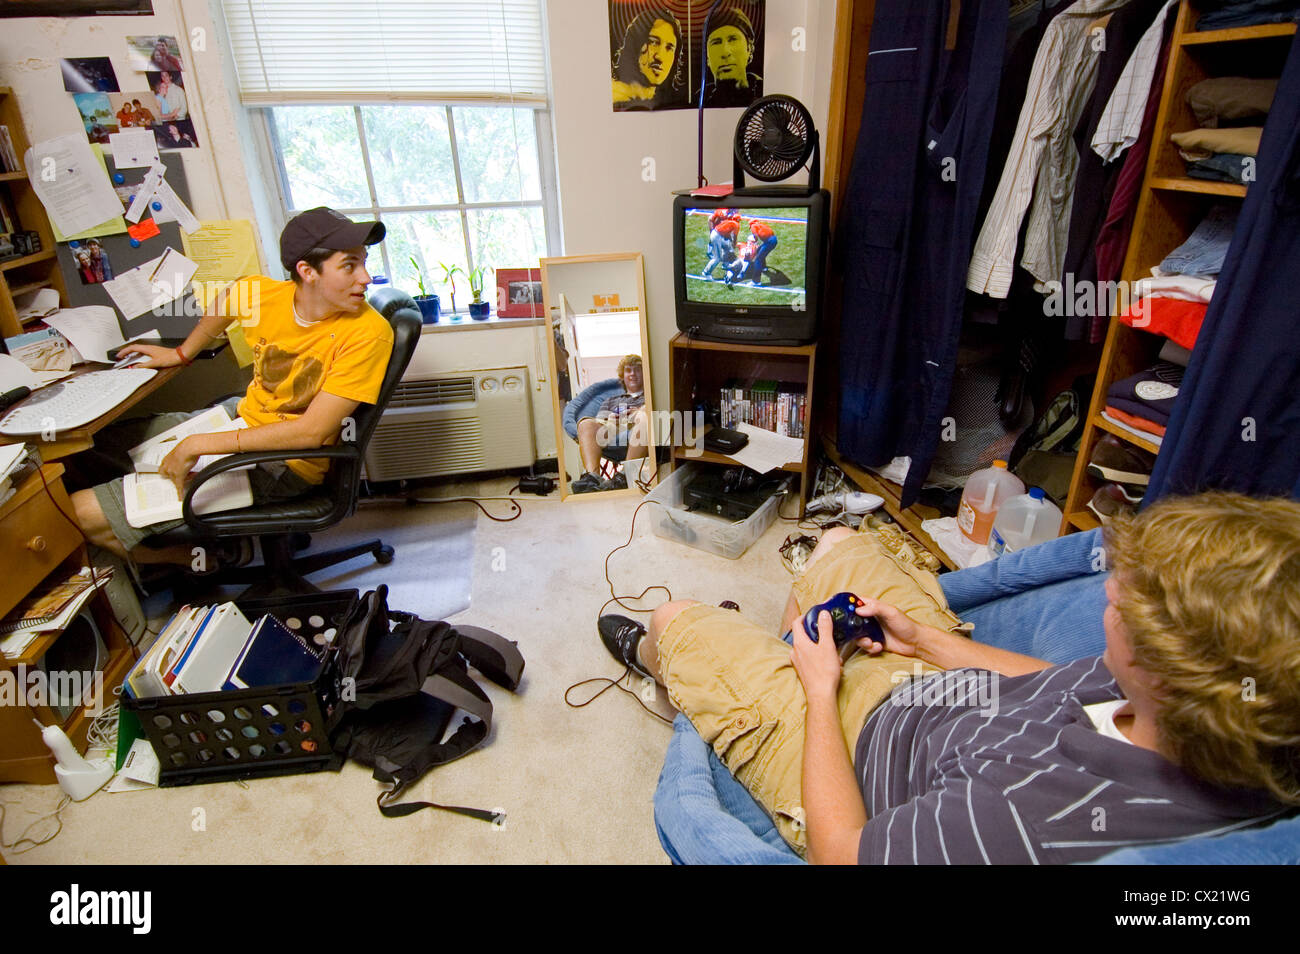 Two young male college students play a video game in their dorm room. Stock Photo